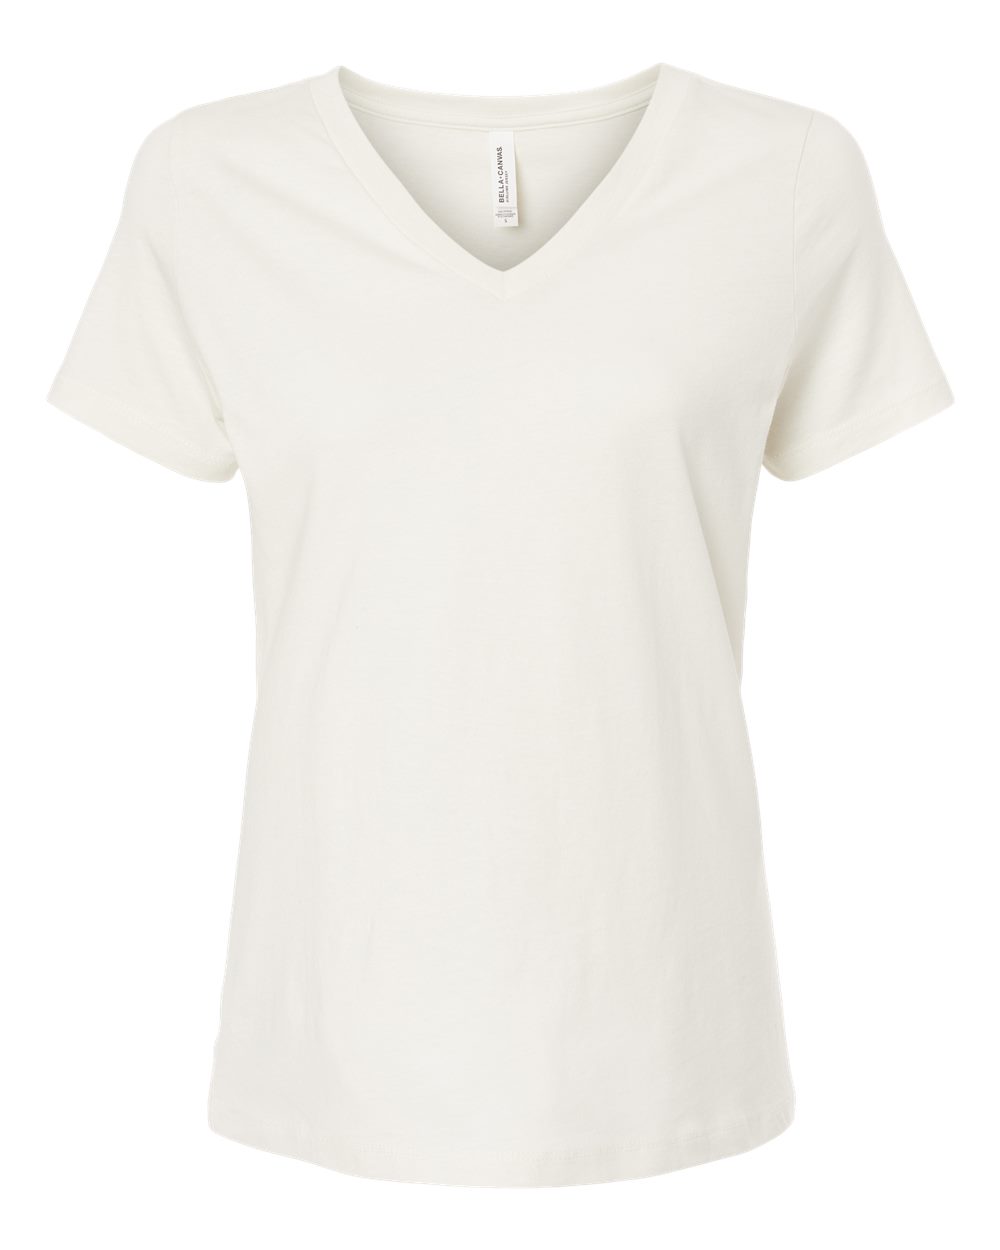 Pretreated BELLA+CANVAS 6405 Women's Relaxed Jersey V-Neck Tee